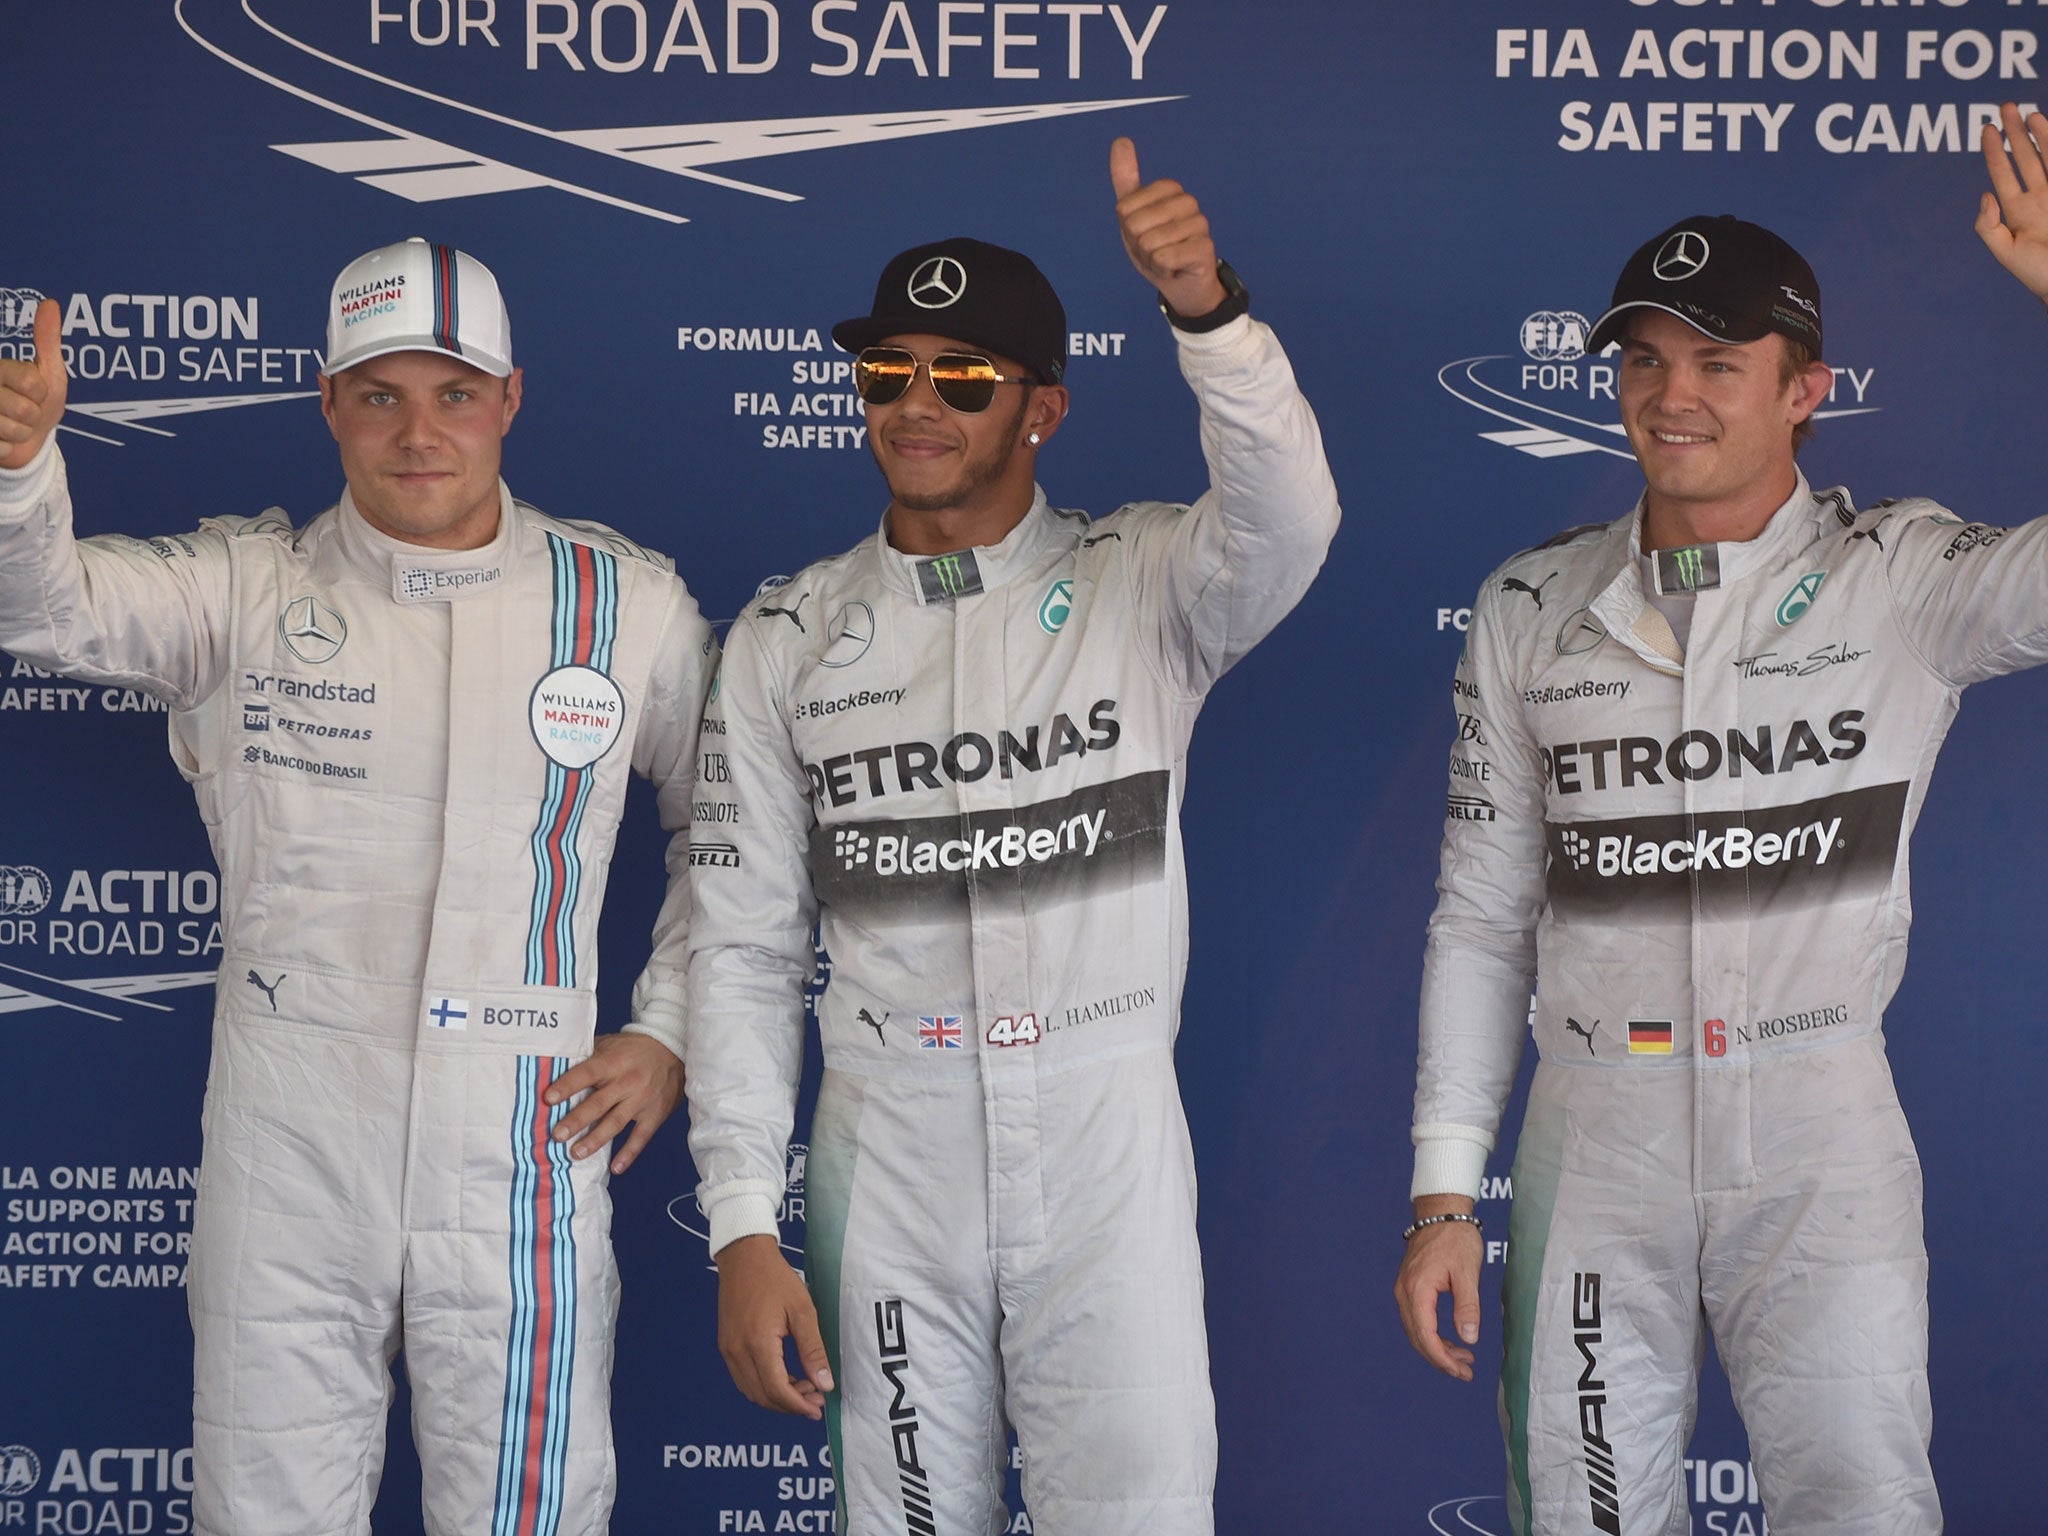 Lewis Hamilton wins Russian Grand Prix but is unhappy with team